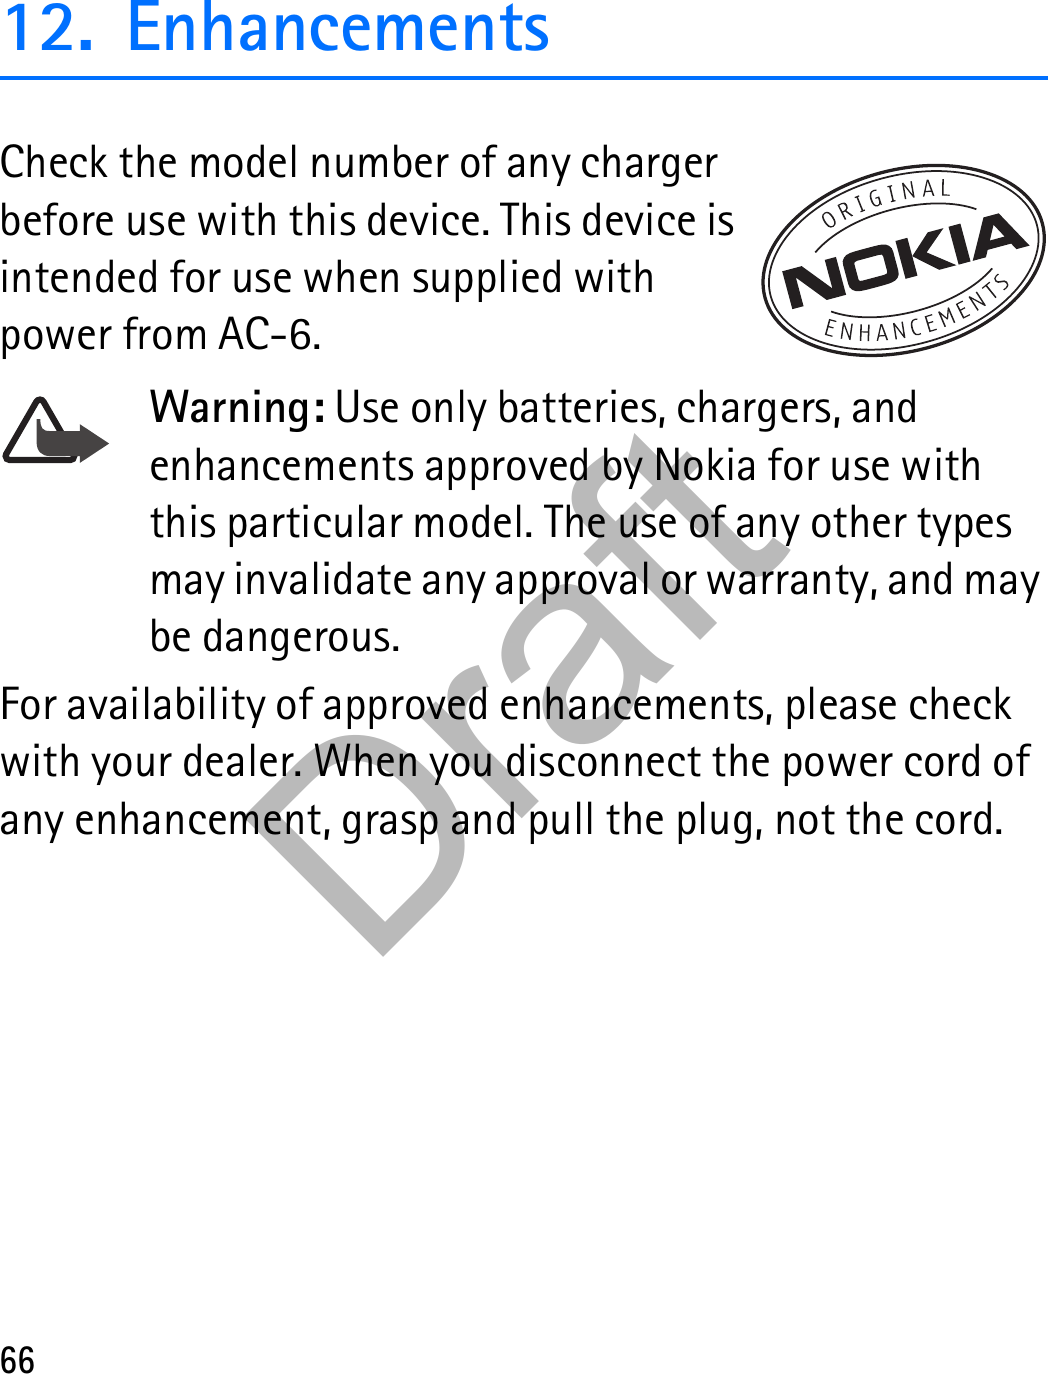 6612. EnhancementsCheck the model number of any charger before use with this device. This device is intended for use when supplied with power from AC-6.Warning: Use only batteries, chargers, and enhancements approved by Nokia for use with this particular model. The use of any other types may invalidate any approval or warranty, and may be dangerous.For availability of approved enhancements, please check with your dealer. When you disconnect the power cord of any enhancement, grasp and pull the plug, not the cord.Draft